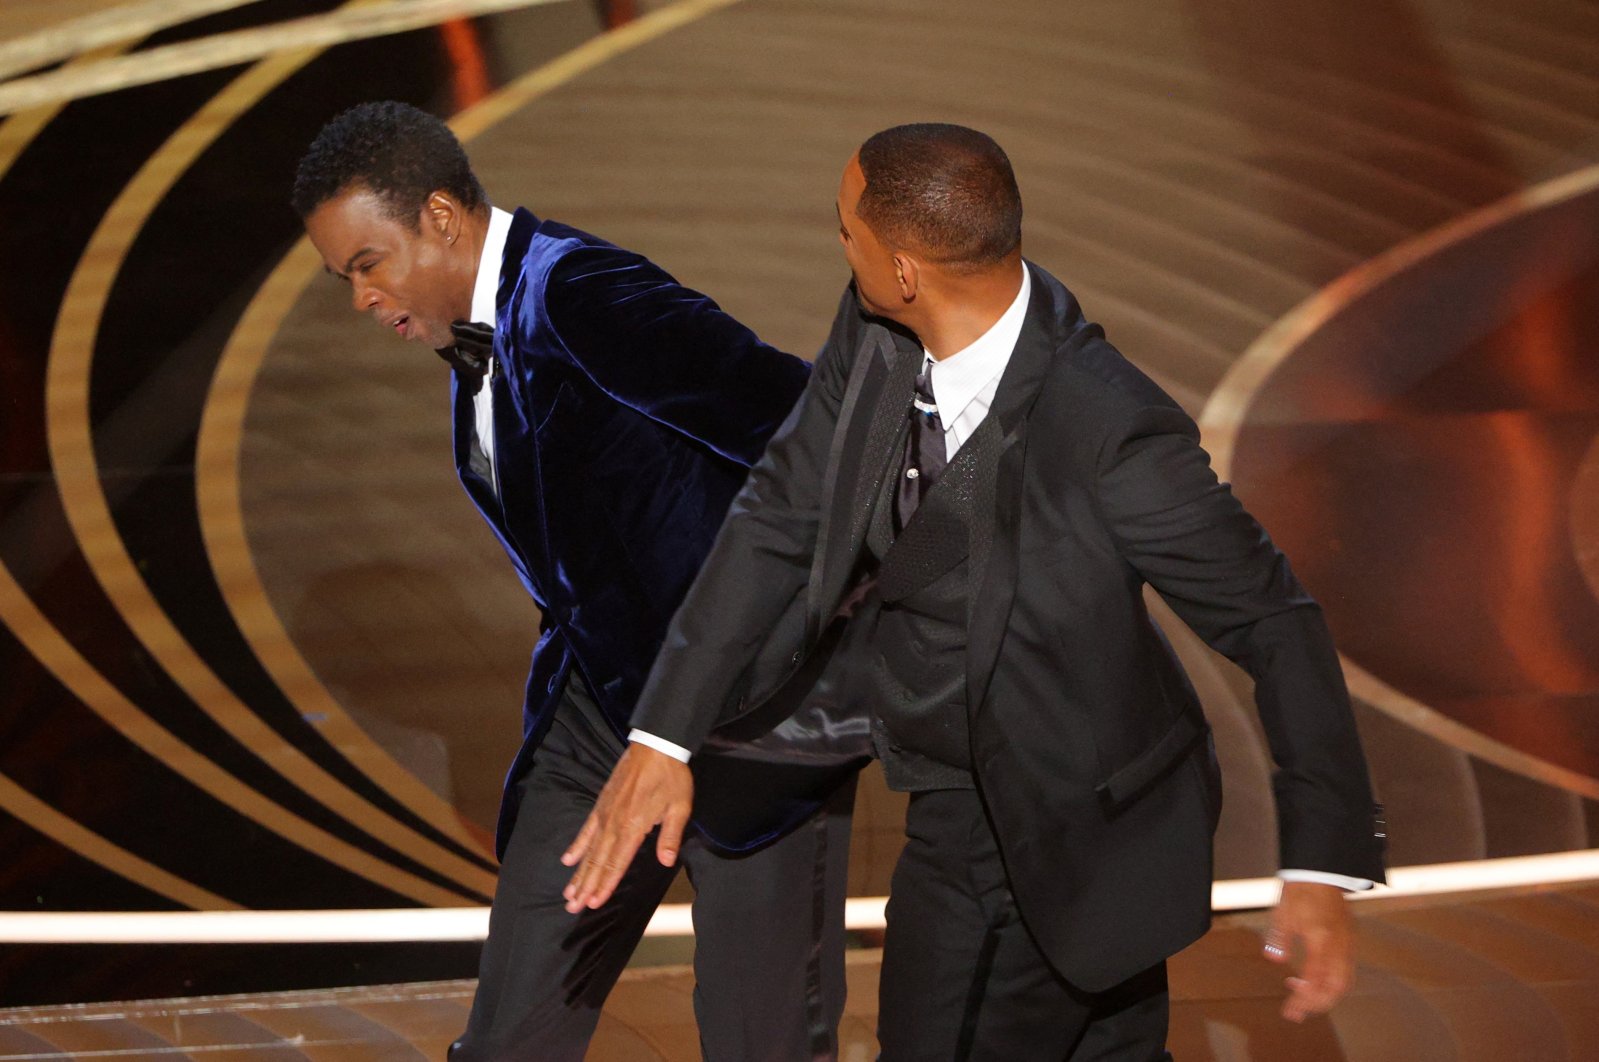 Will Smith (R) hits Chris Rock as Rock spoke on stage during the 94th Academy Awards in Hollywood, Los Angeles, California, U.S., March 27, 2022. (Reuters Photo)